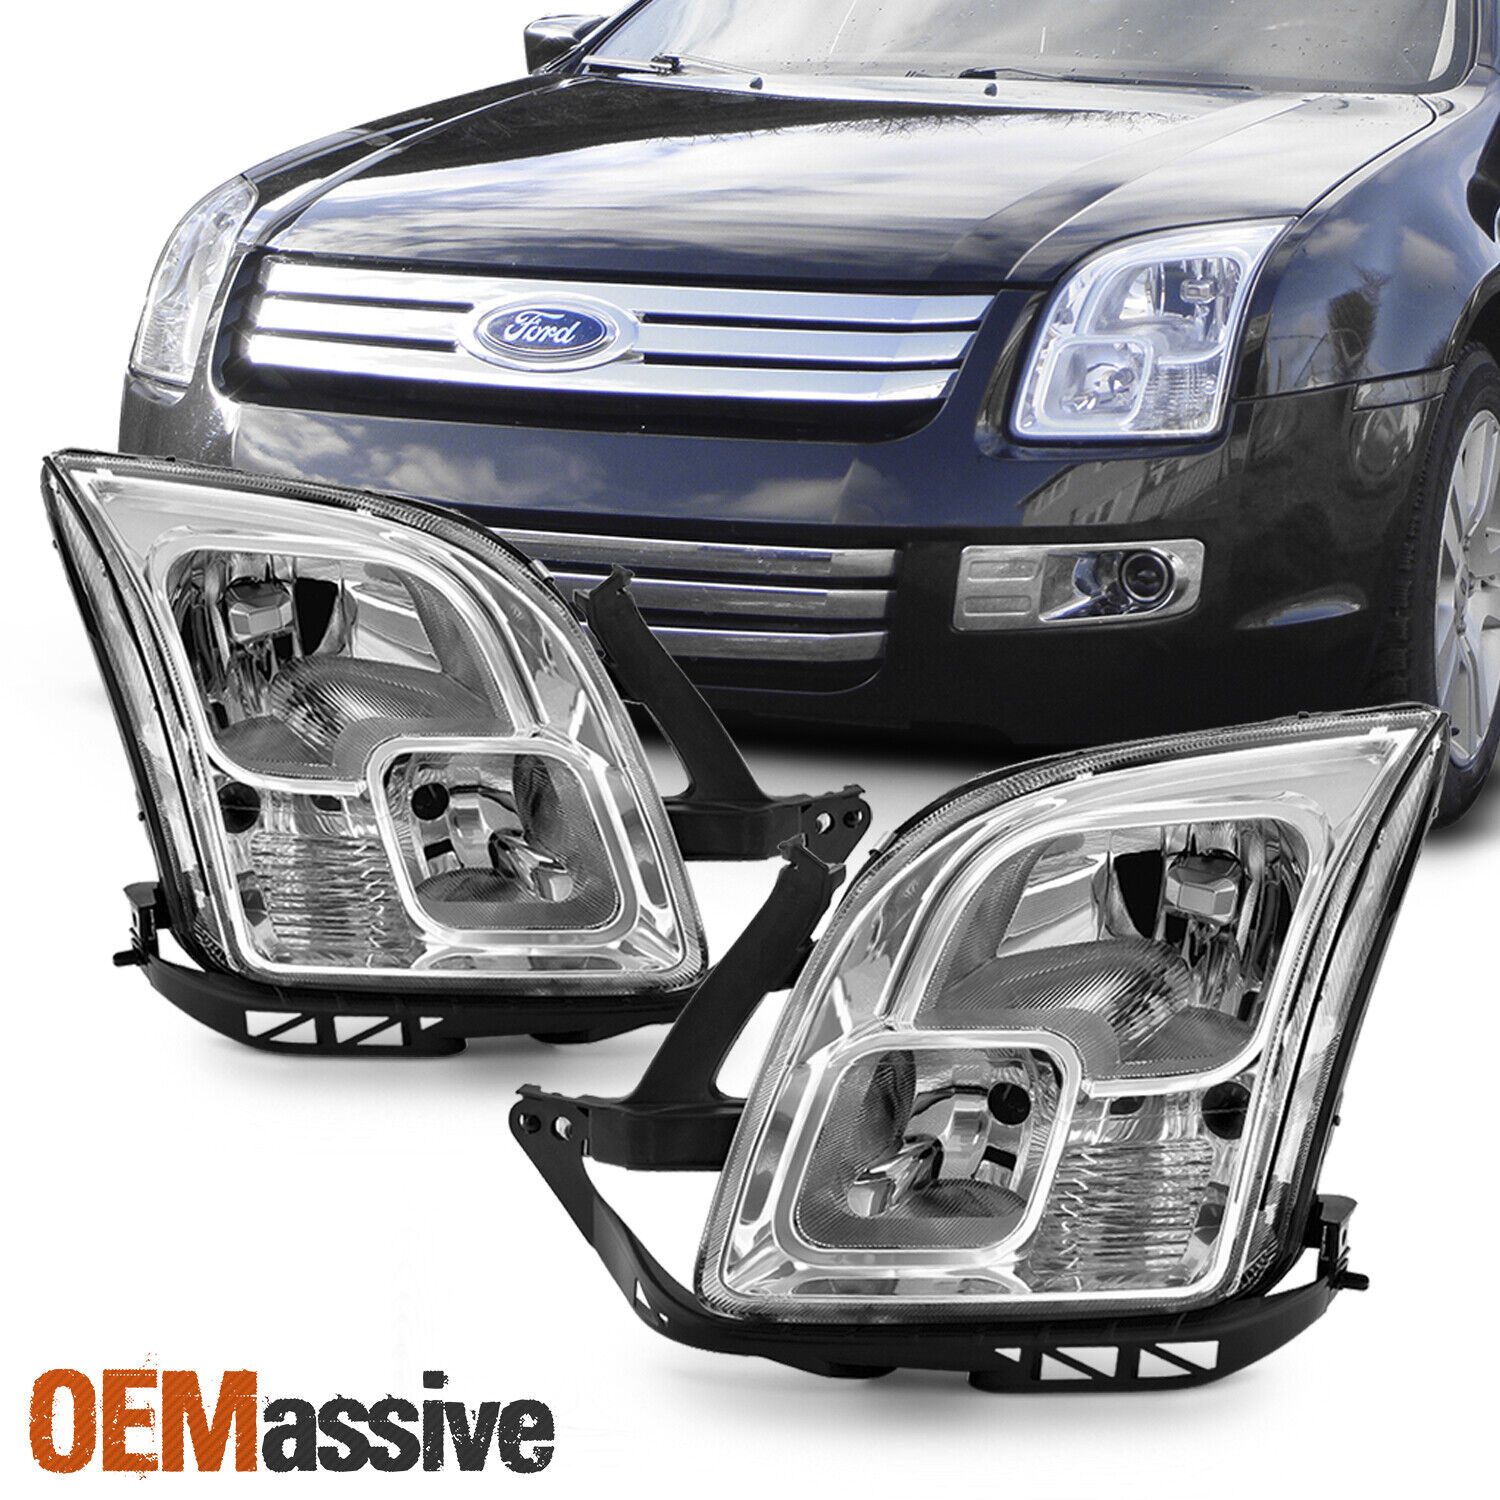 Fits 2006-2009 Ford Fusion Headlights Replacement Factory Style Lights Lamps set